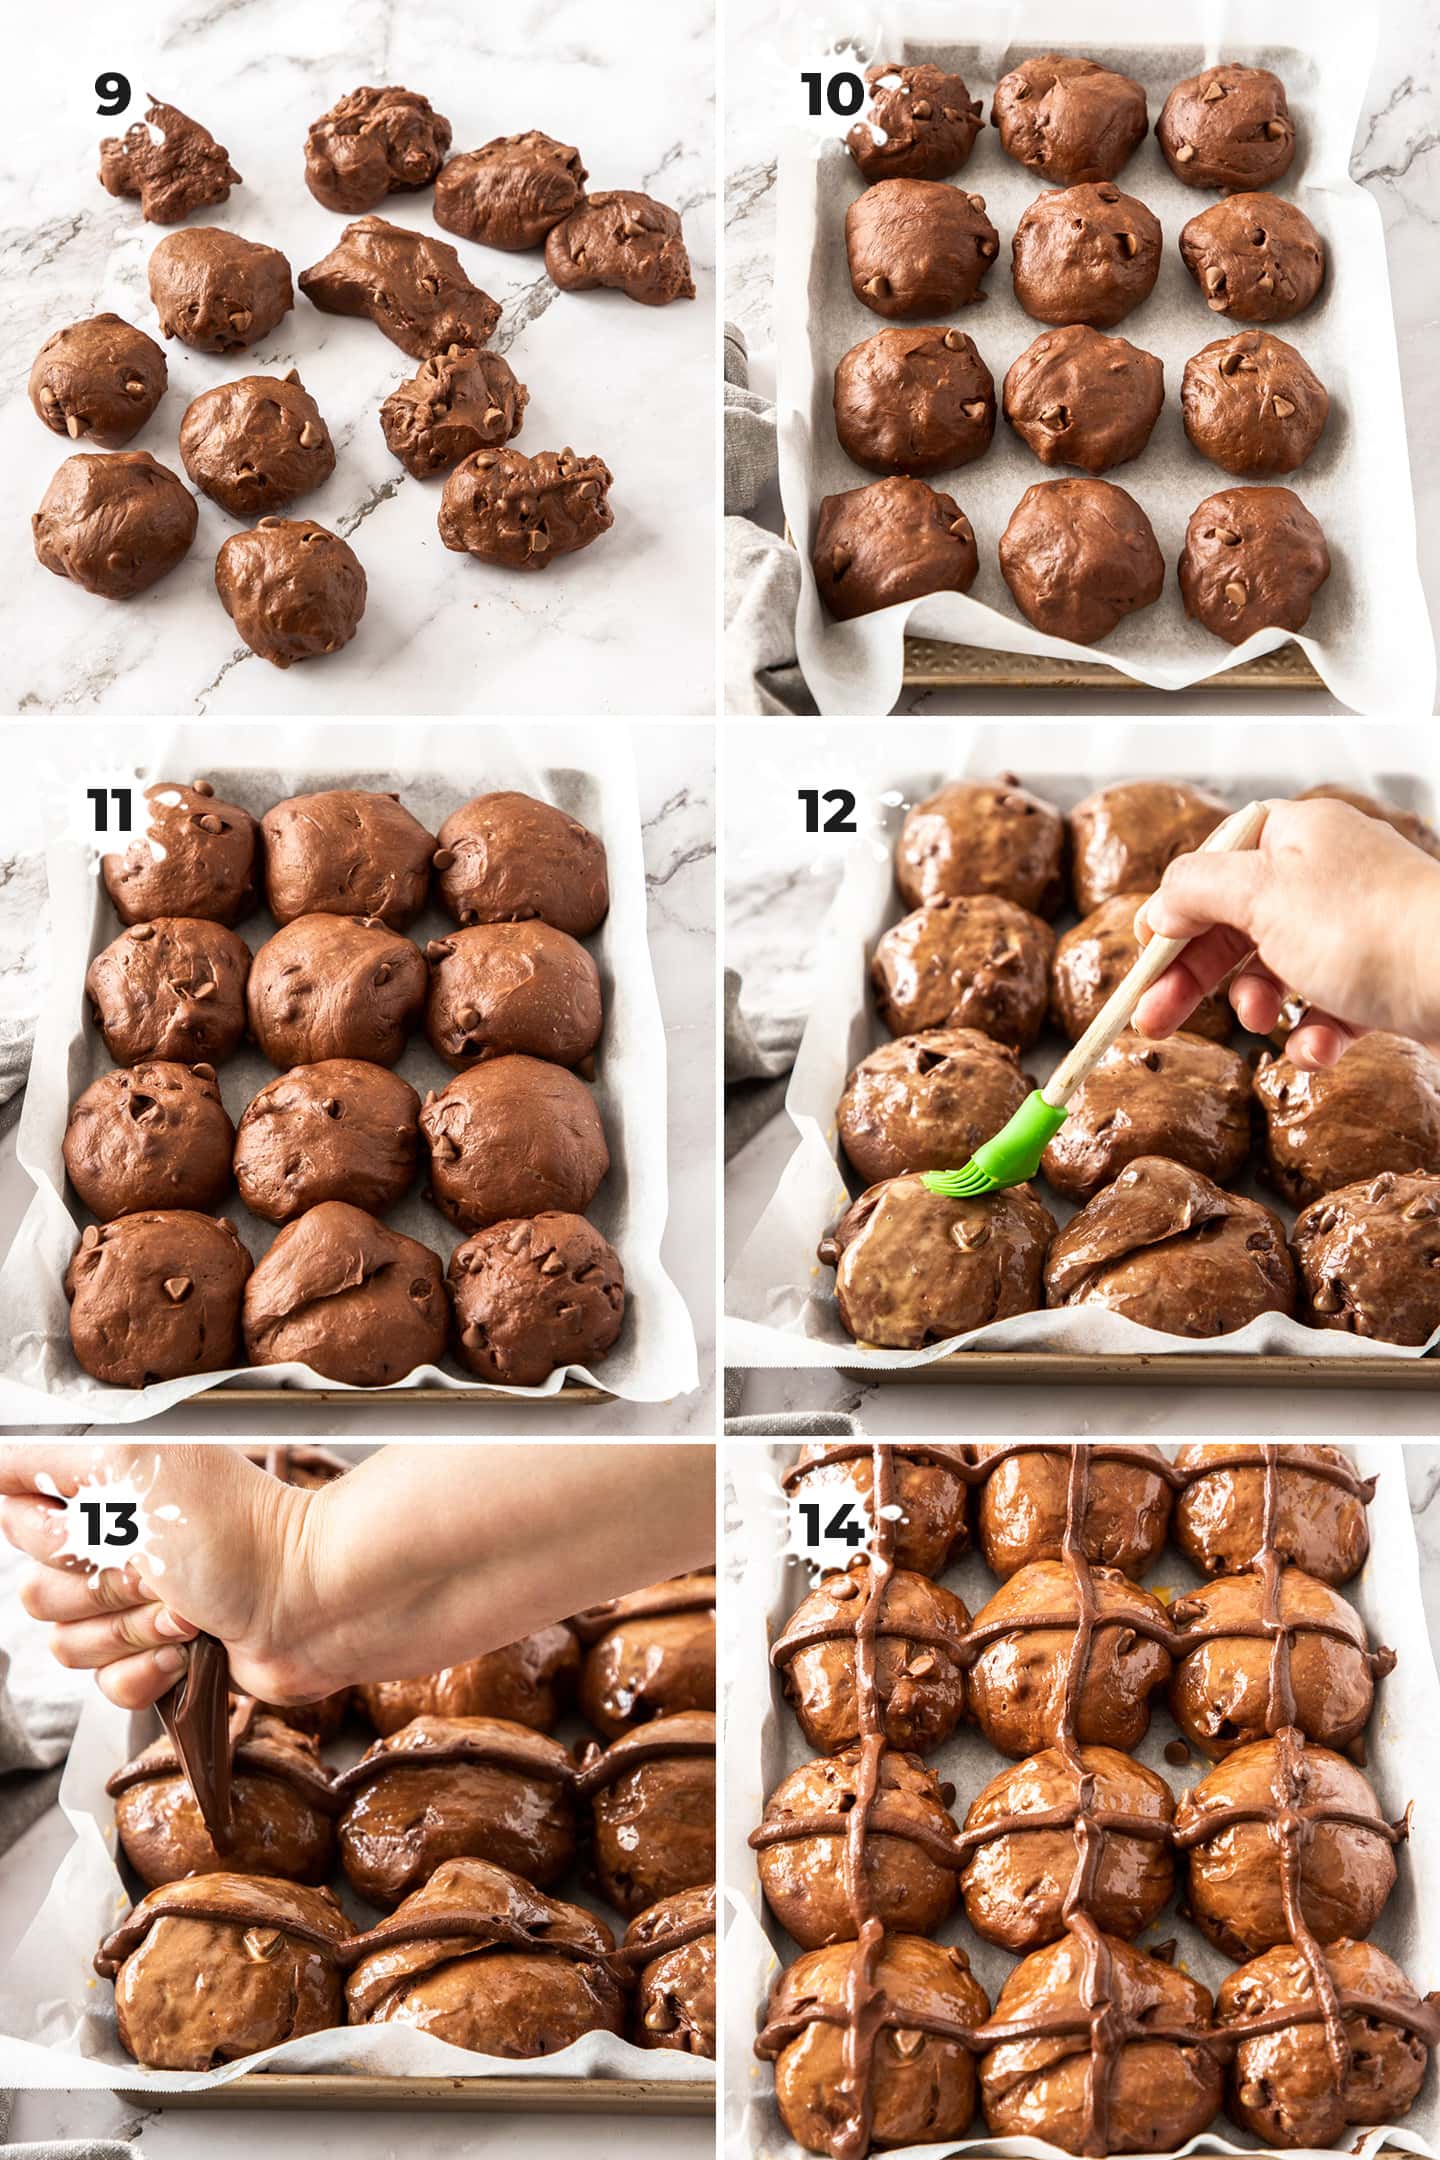 6 images showing the how to roll and proof hot cross buns.